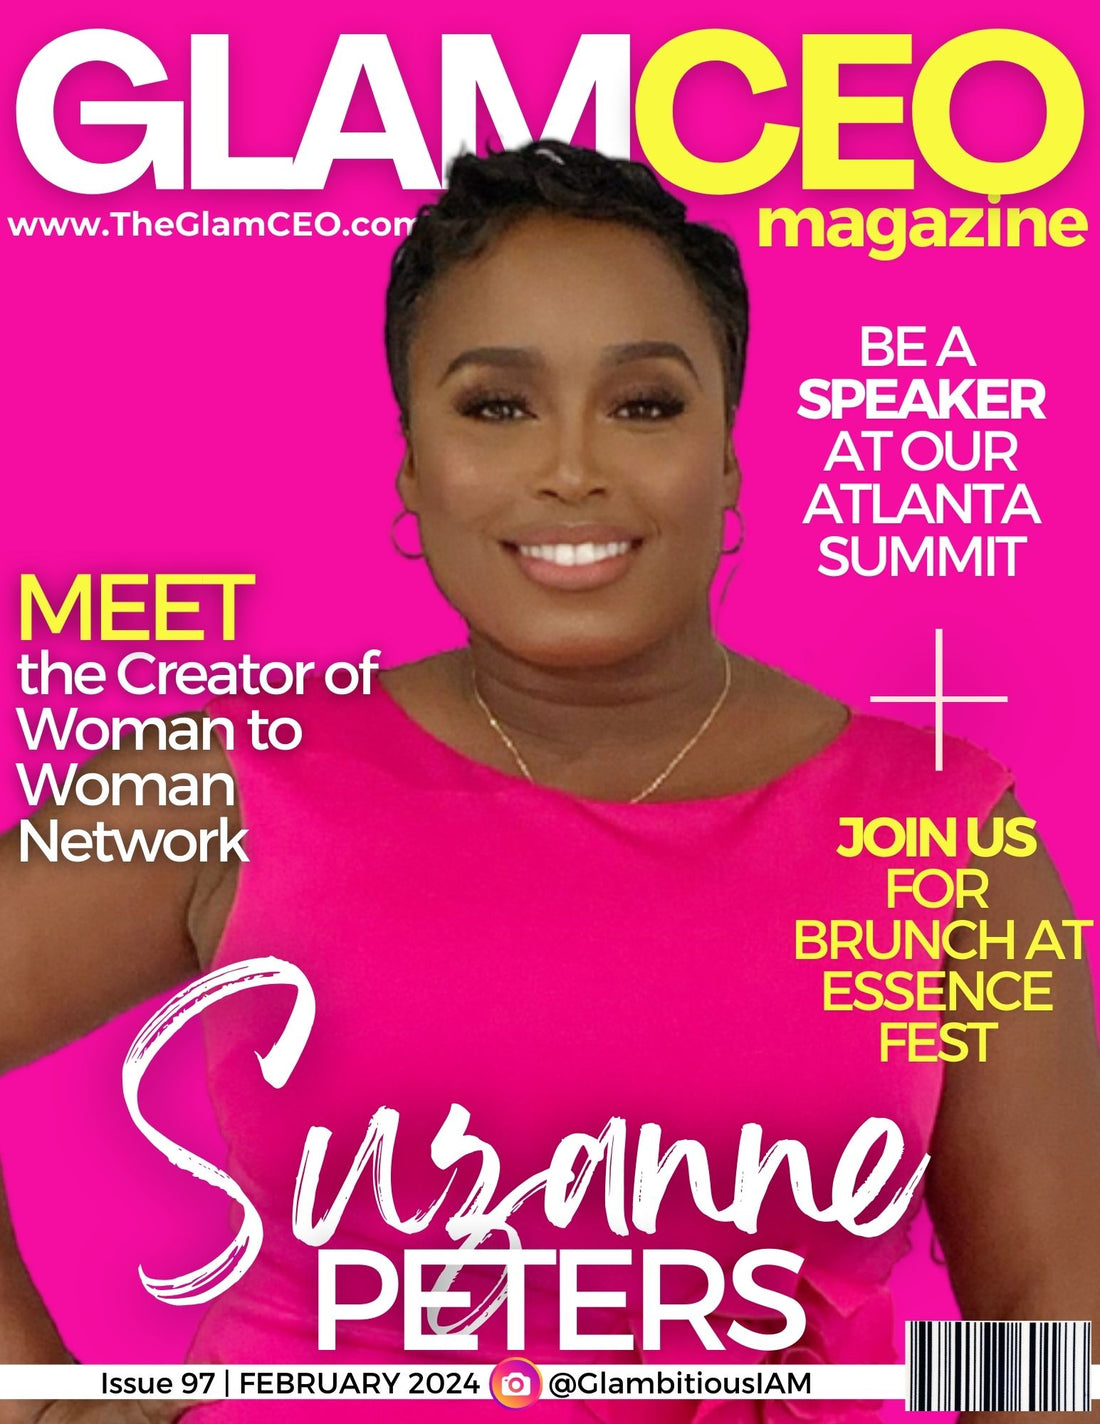 Meet the Creator of Woman to Woman Network!